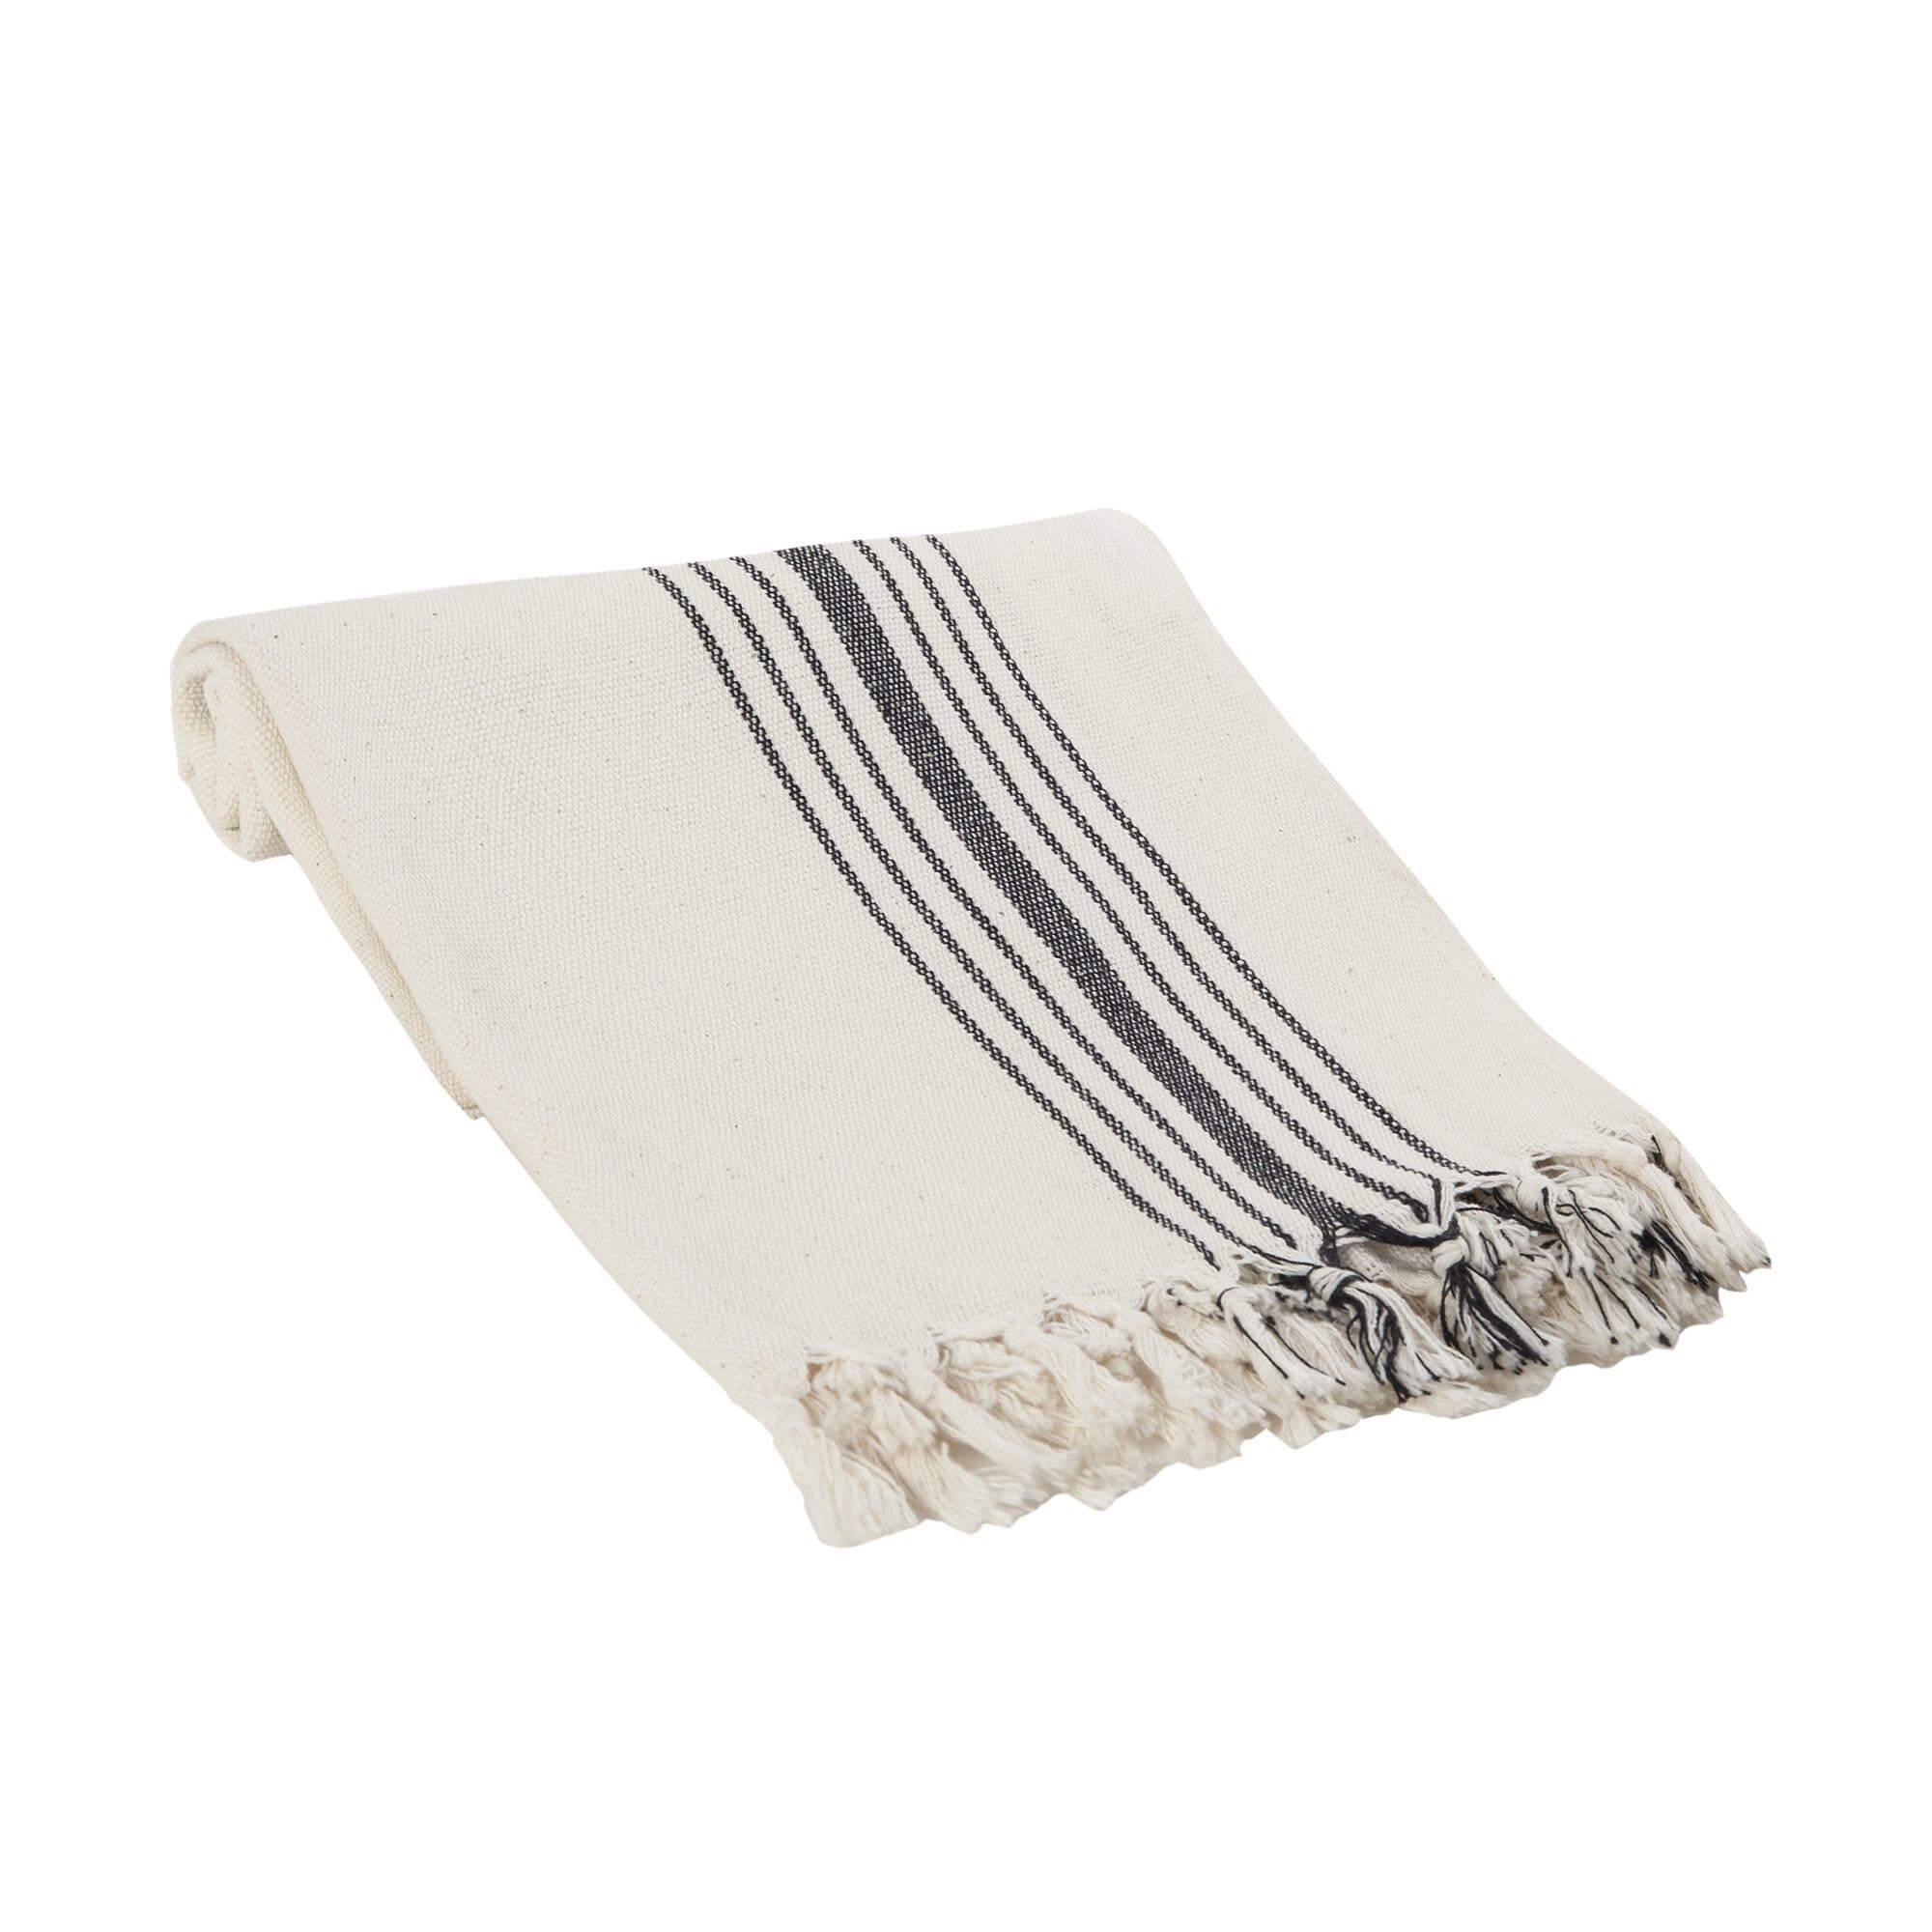 Whisper Weight Natural Turkish Hand Towel - Olive and Linen